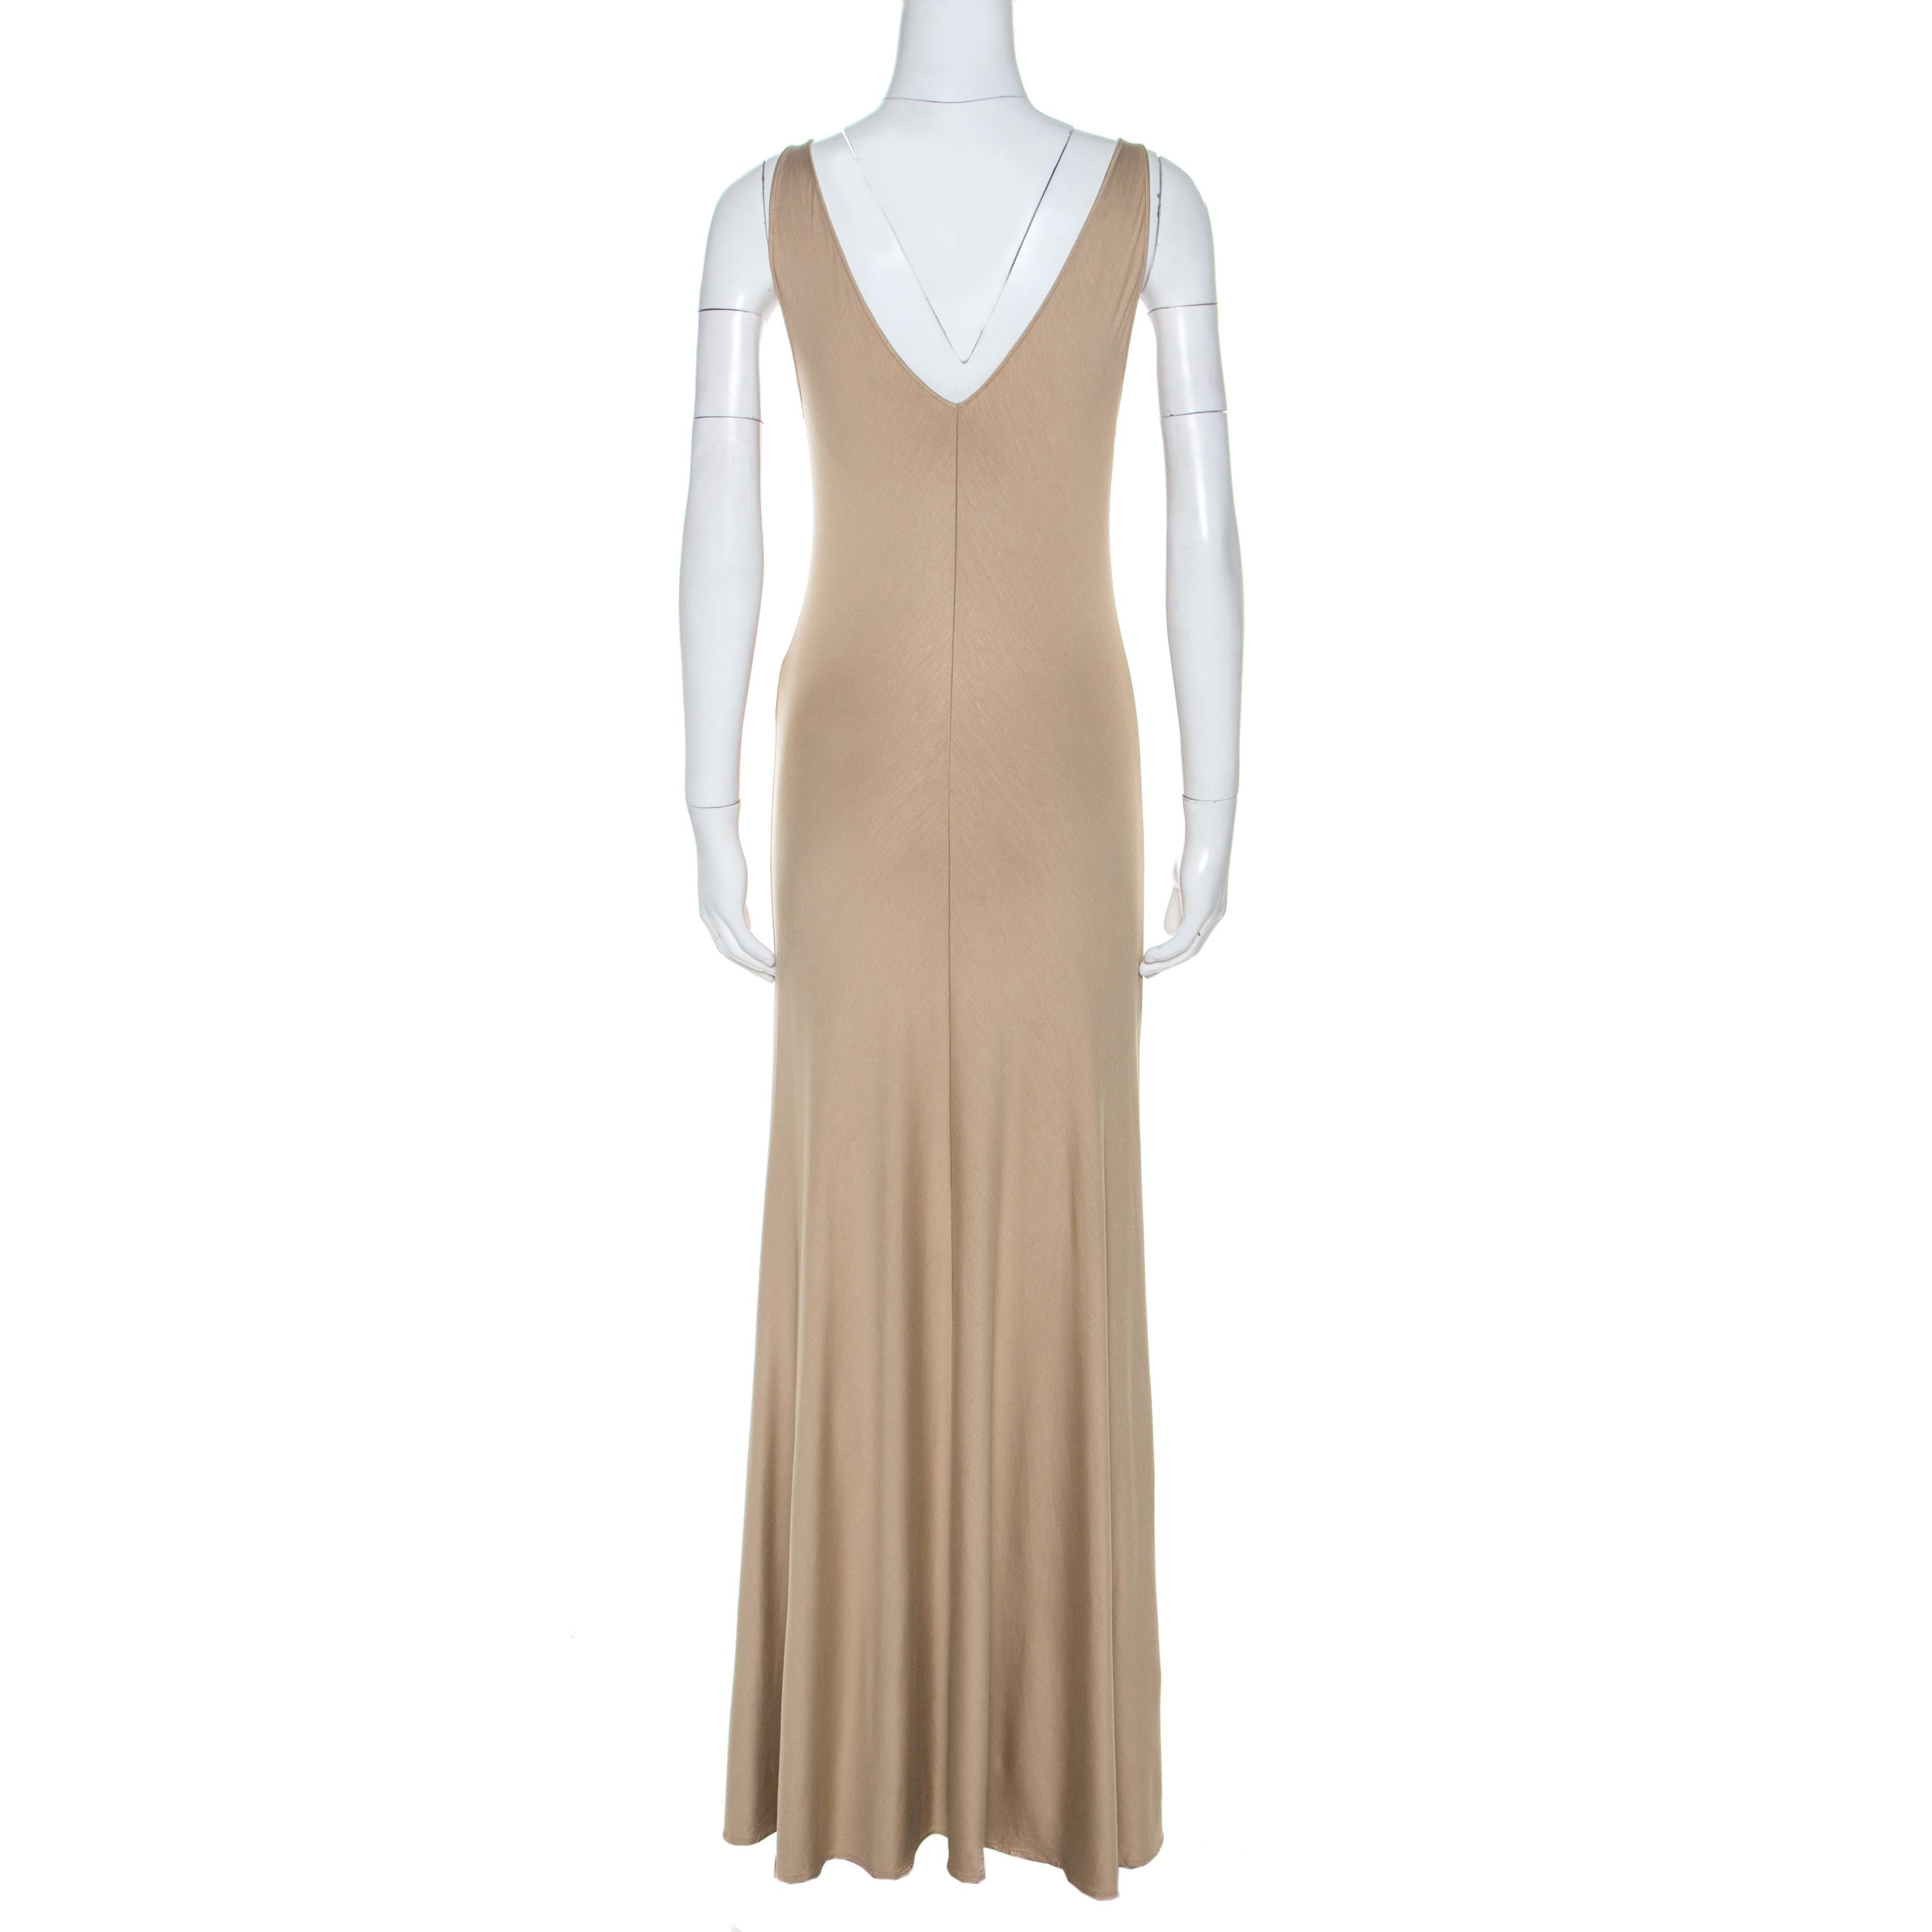 Turn heads when you wear this Ralph Lauren dress that lends a sophisticated edge to your personality. This beige ensemble is the perfect outfit for brunches or a regular day out. It has a sleeveless style with a V neckline and a fabulous fit.

